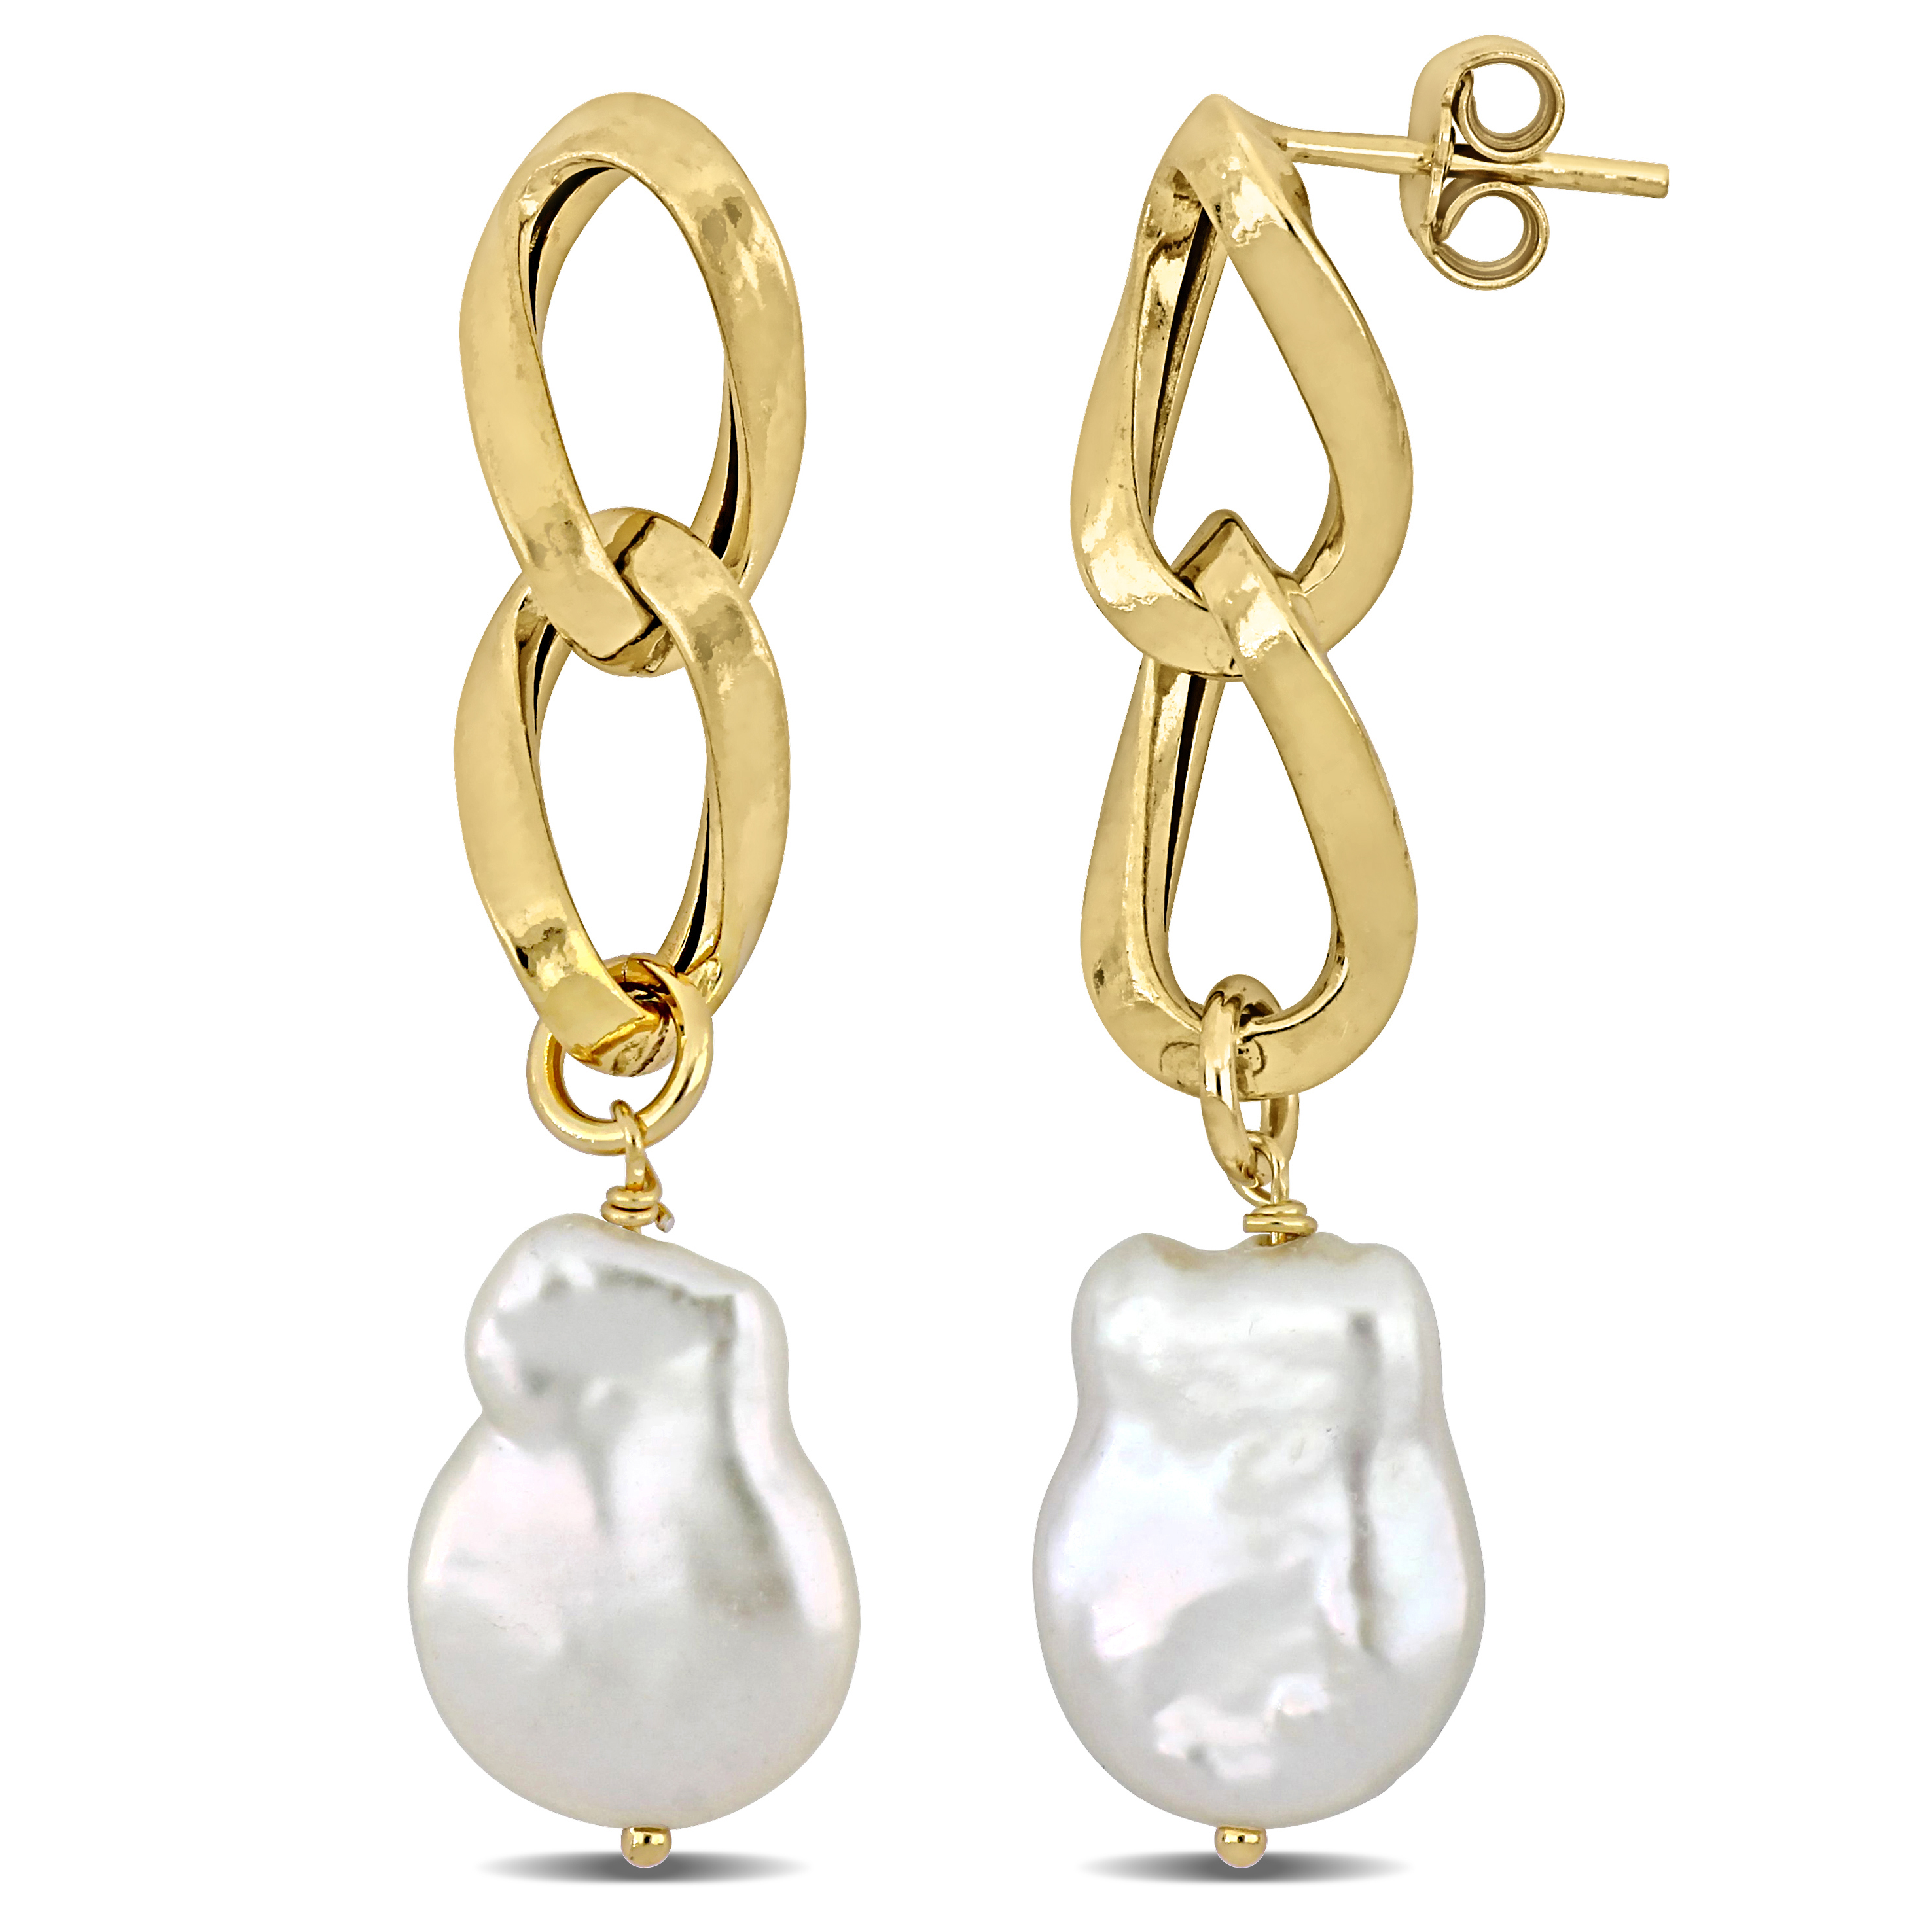 12-13 MM Cultured Freshwater Keshi Pearl Double Link Drop Earrings in Yellow Gold Plated Sterling Silver